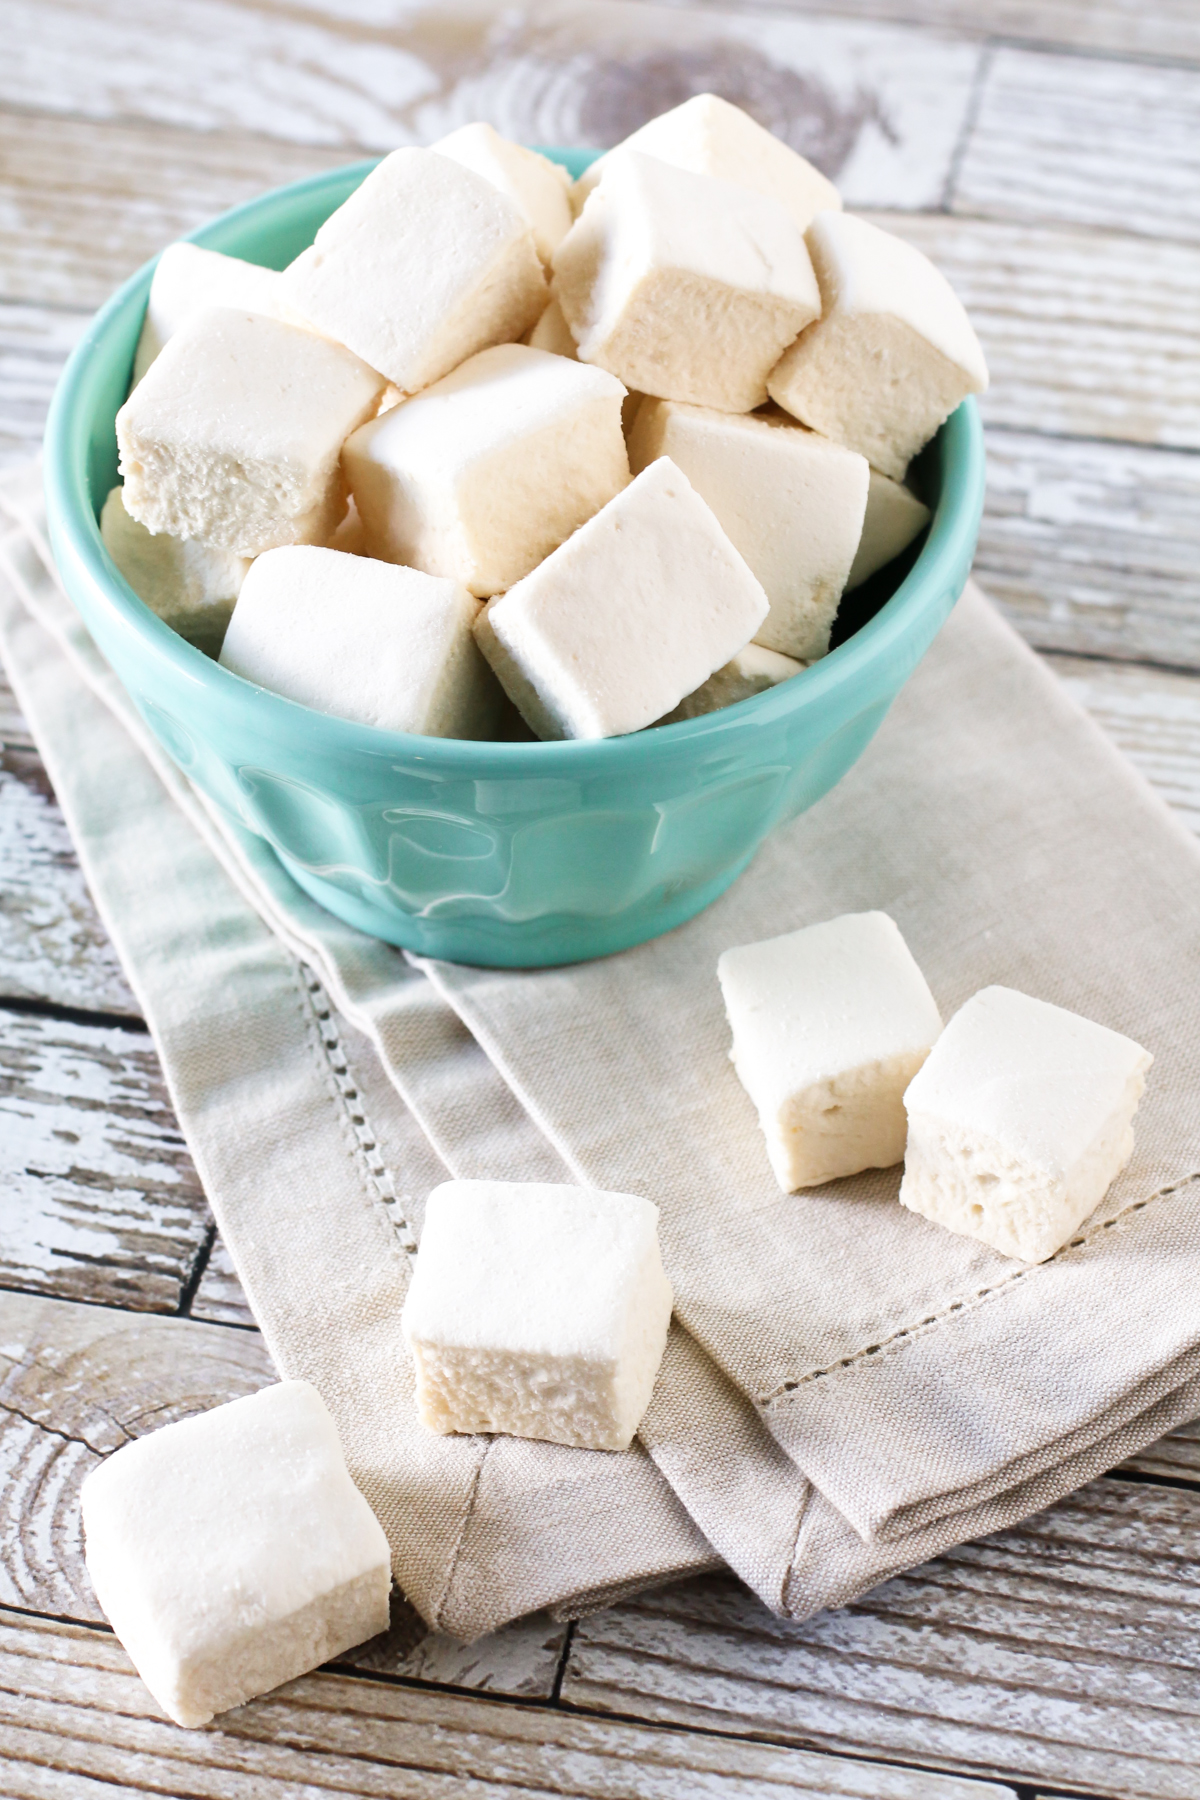 Against All Grain Paleo Marshmallows from the Celebrations Cookbook. Light, fluffy little pillows of sweet goodness!